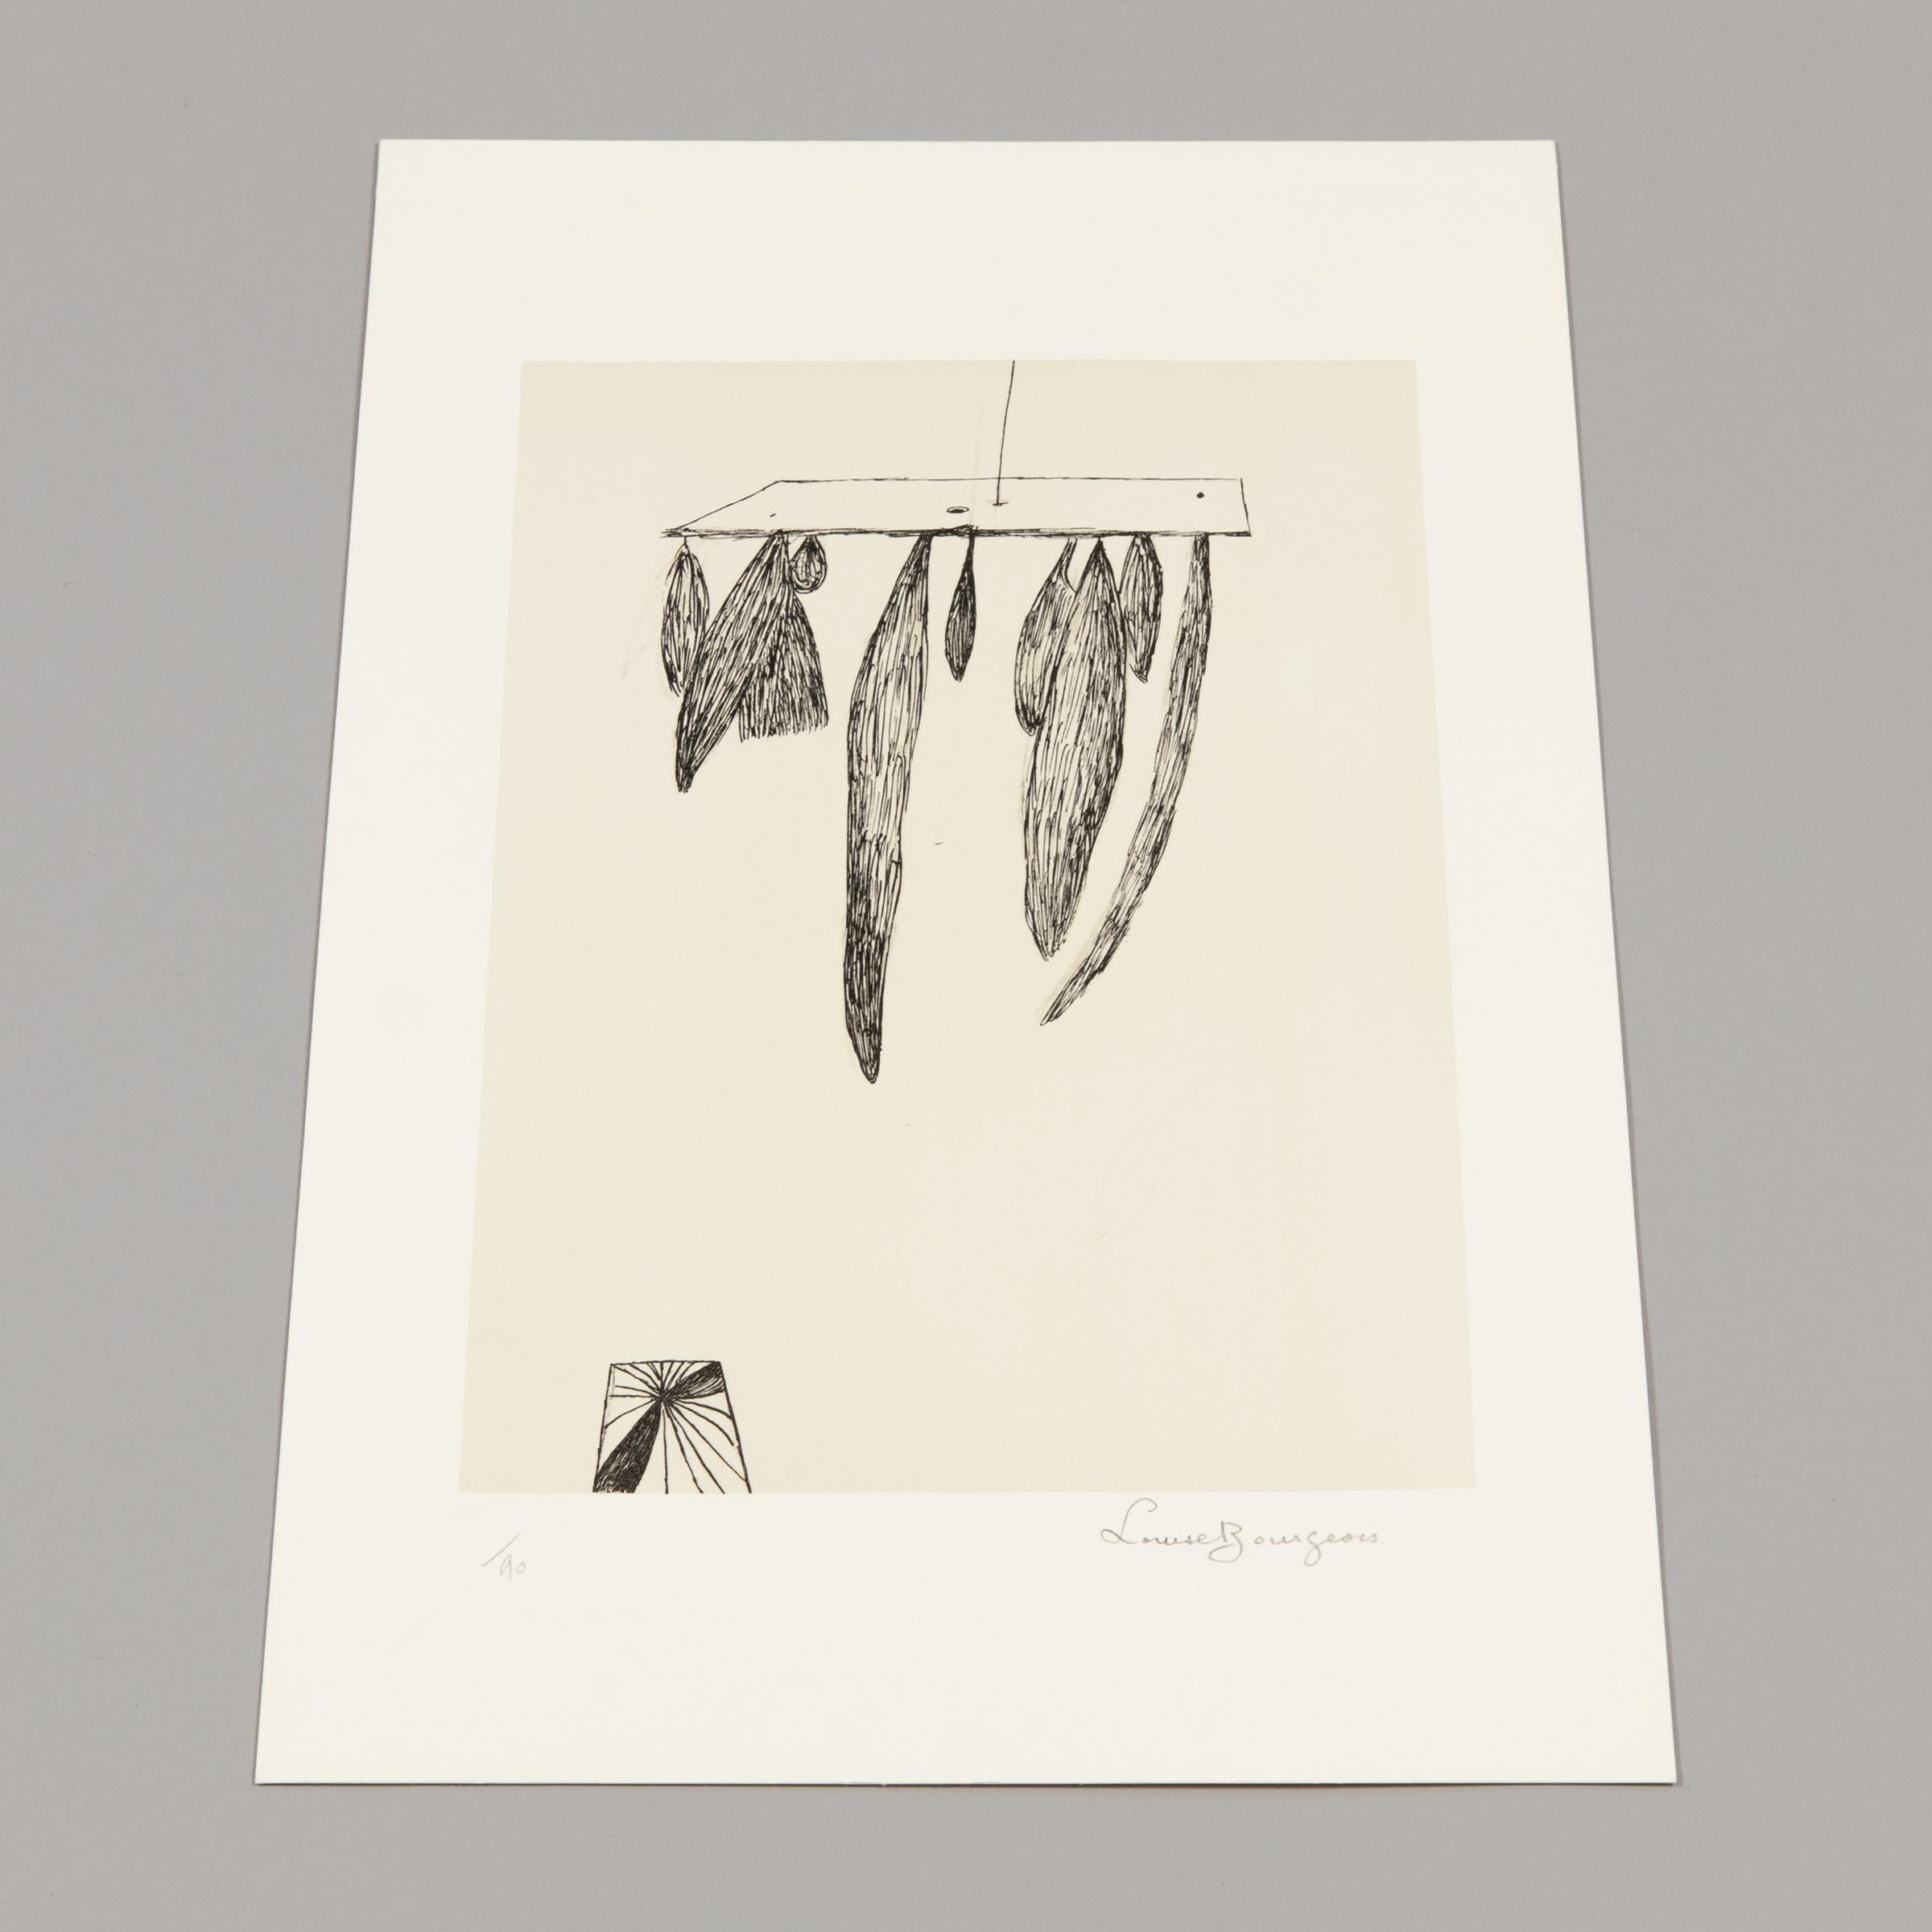 Louise Bourgeois, Sheaves (Version 1) - Original Hand-signed Print For Sale 3